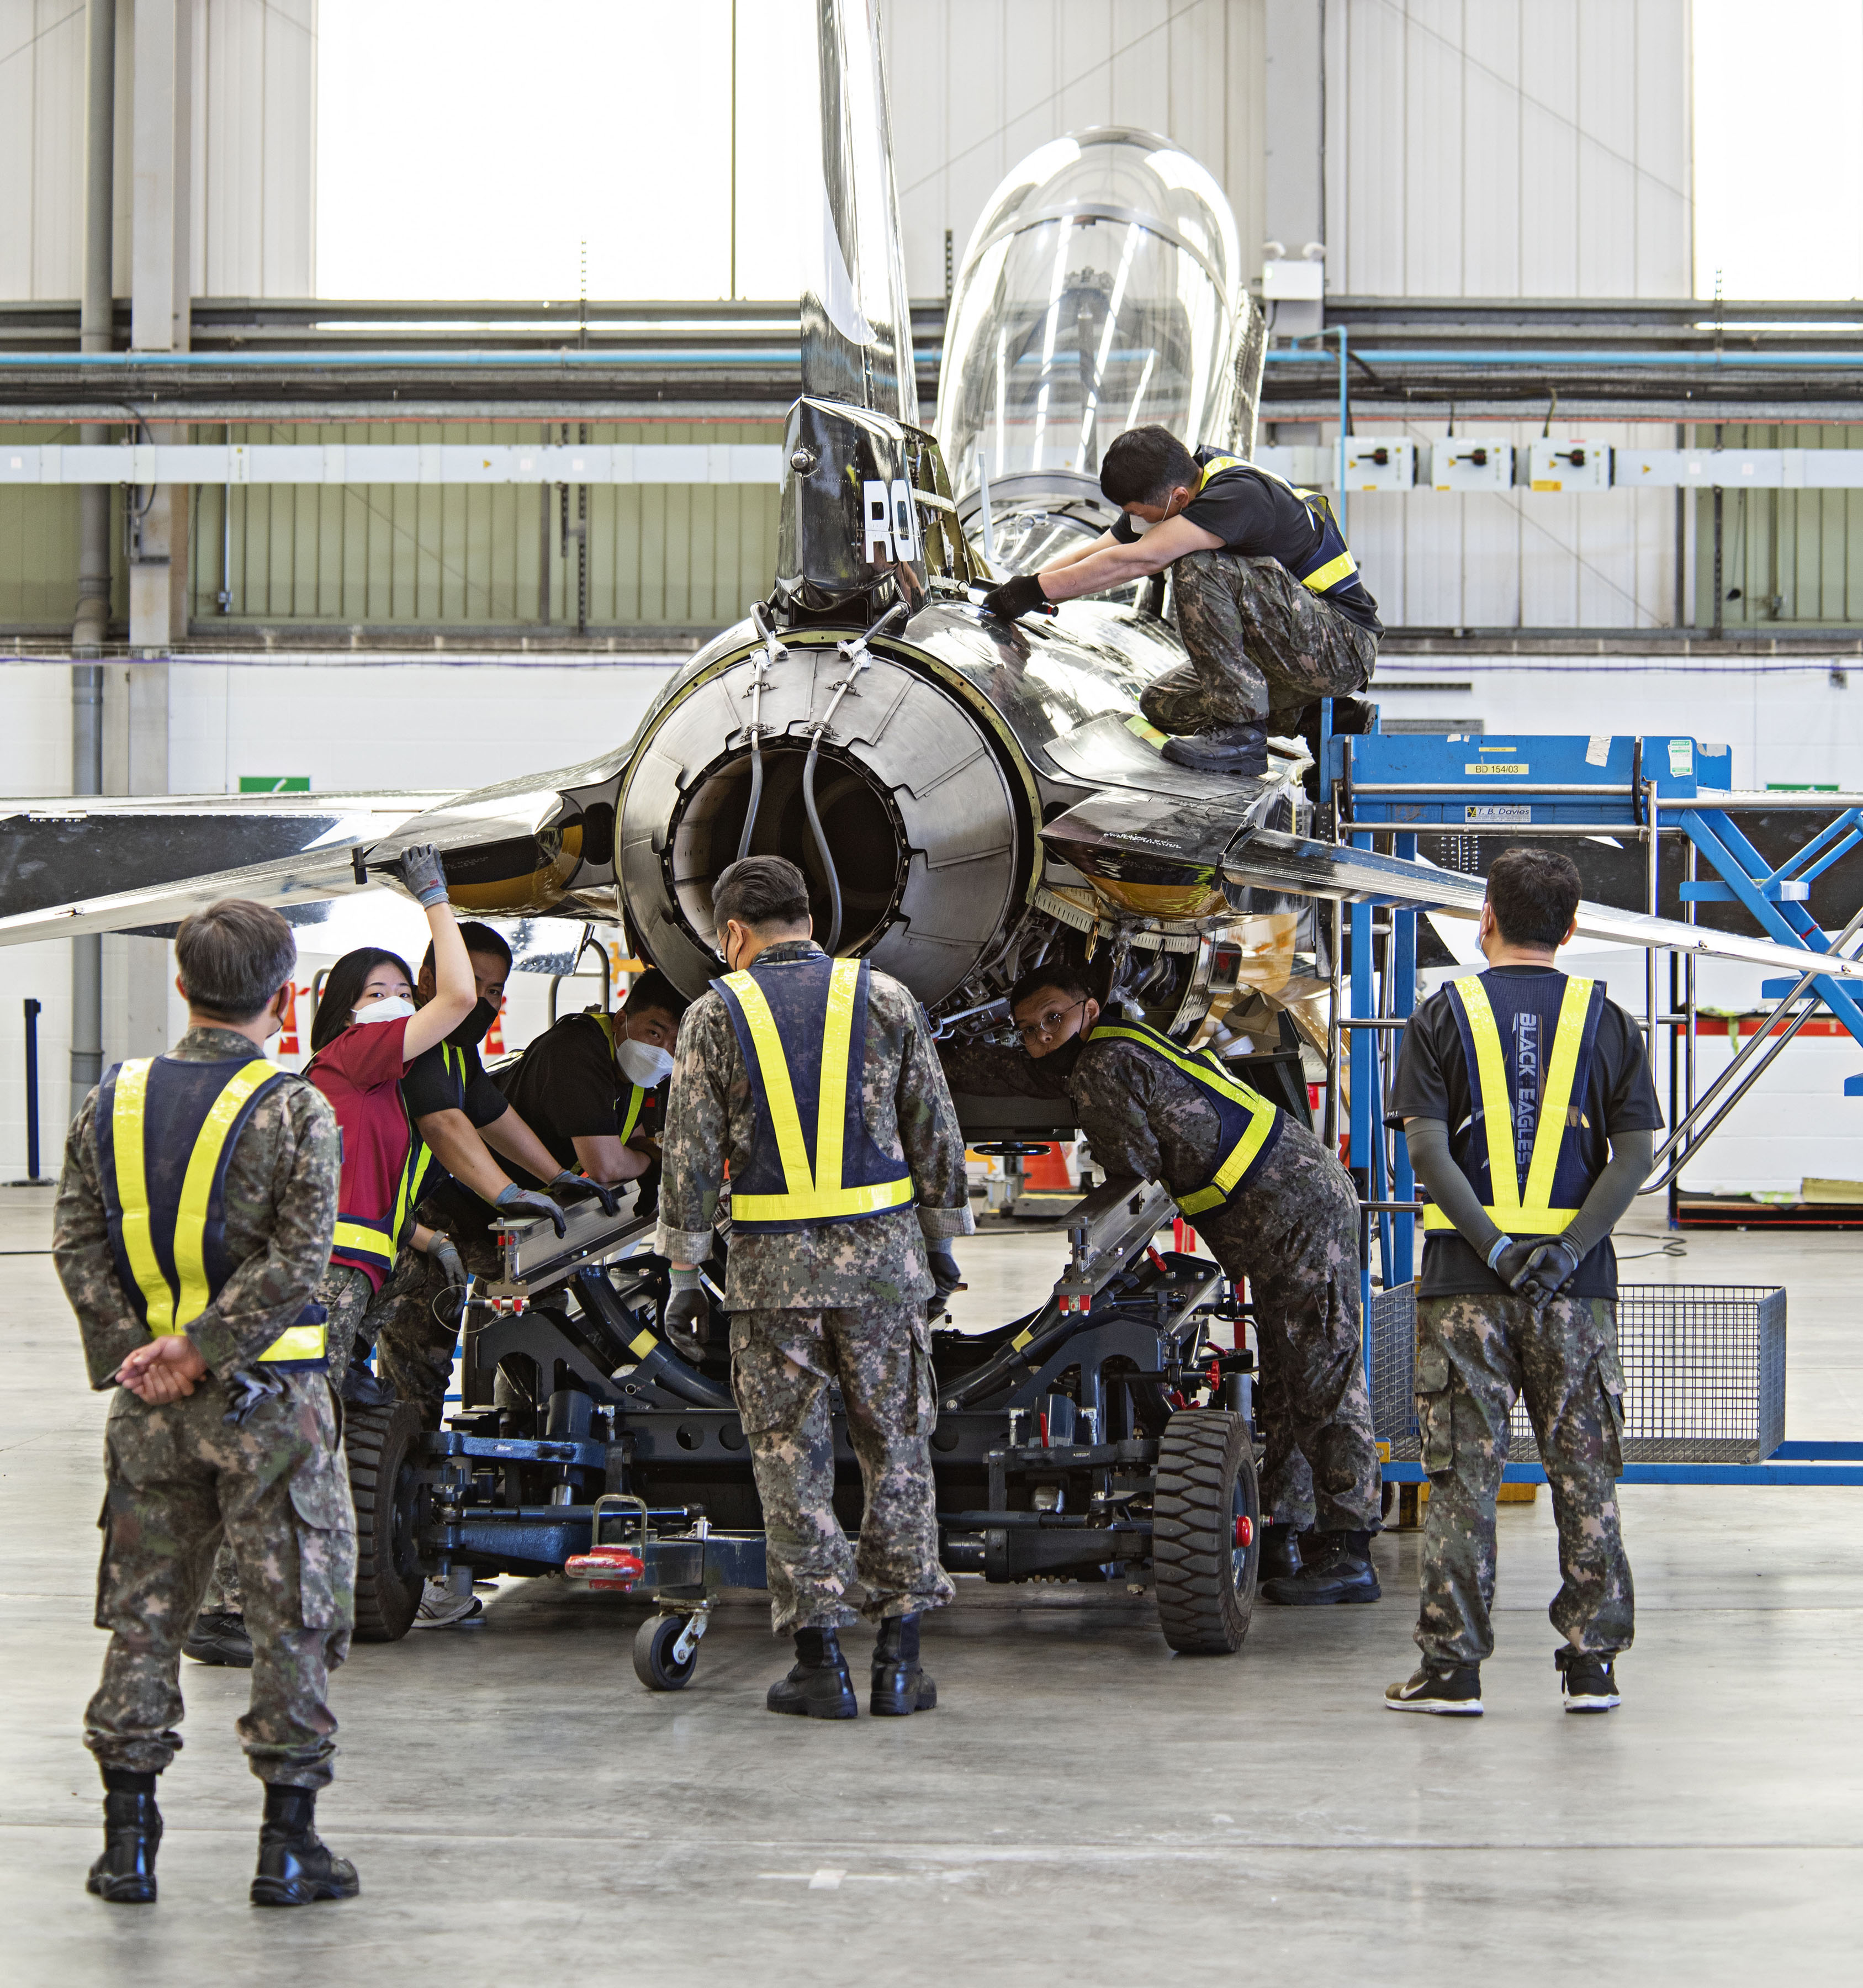 Image shows Korean Air Force Pilots working on Black Eagle aircraft parts.